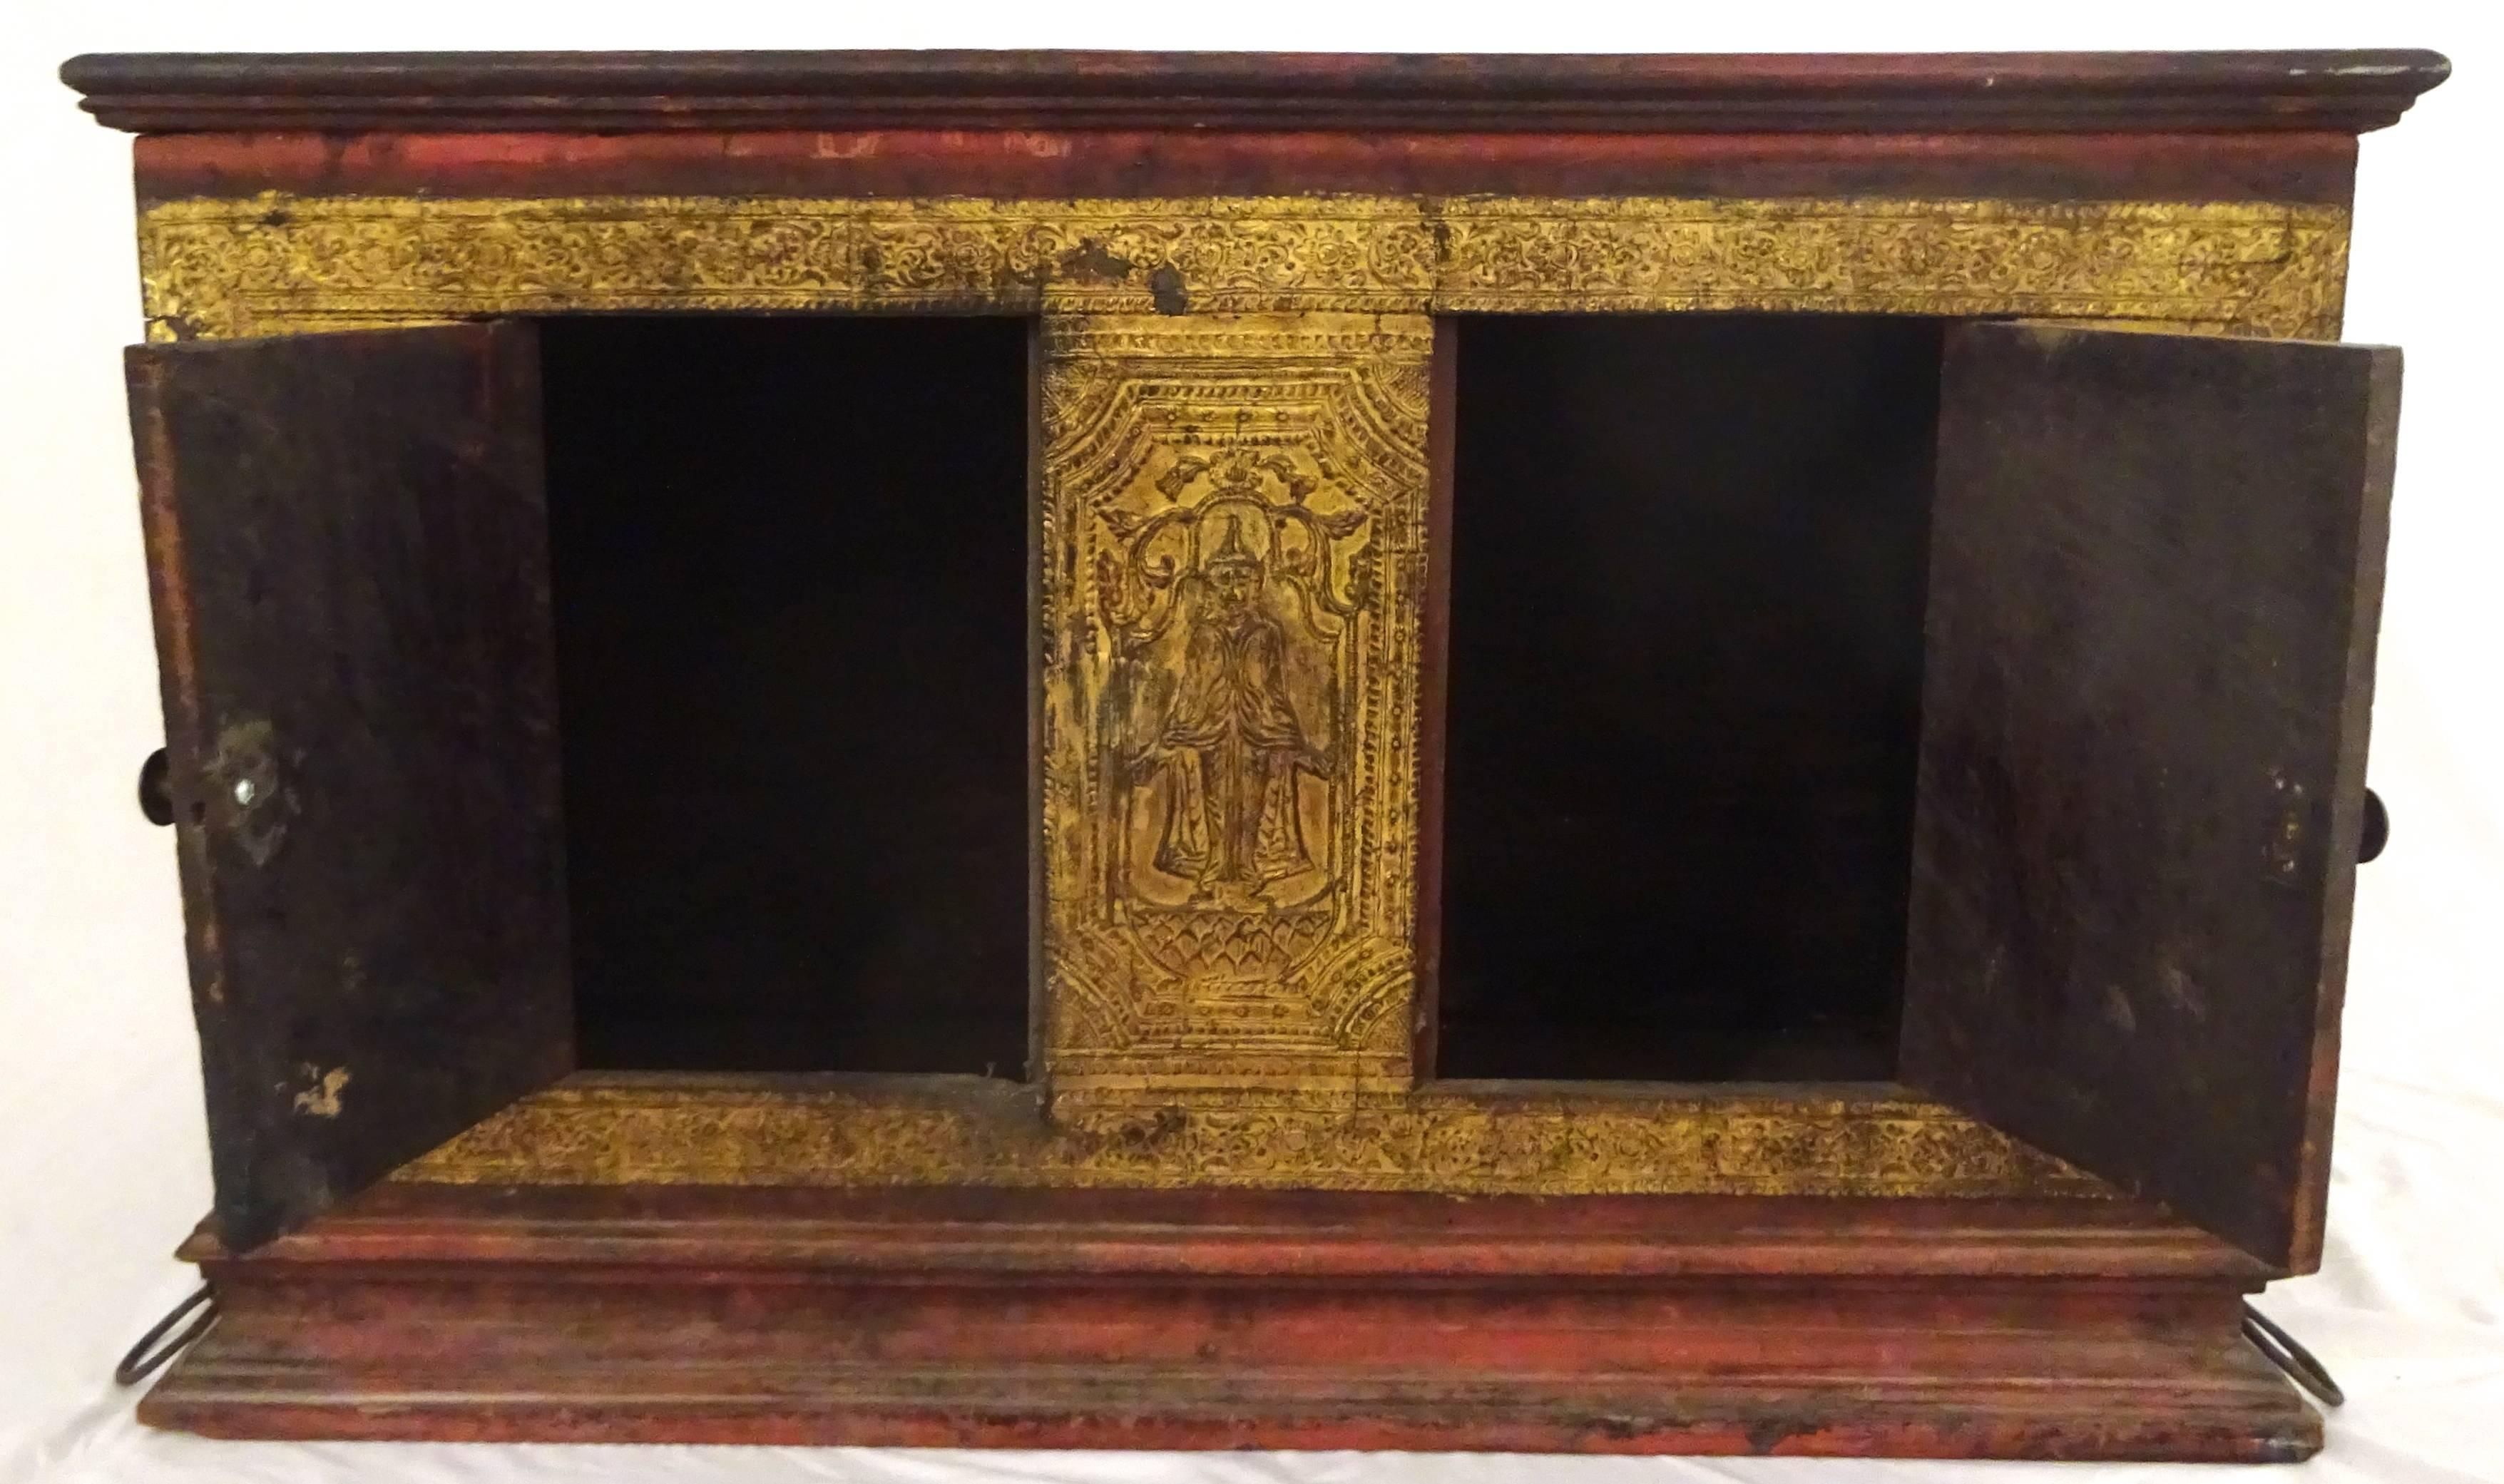 Stunning late 19th century Thai parcel-gilt and painted wedding trunk.